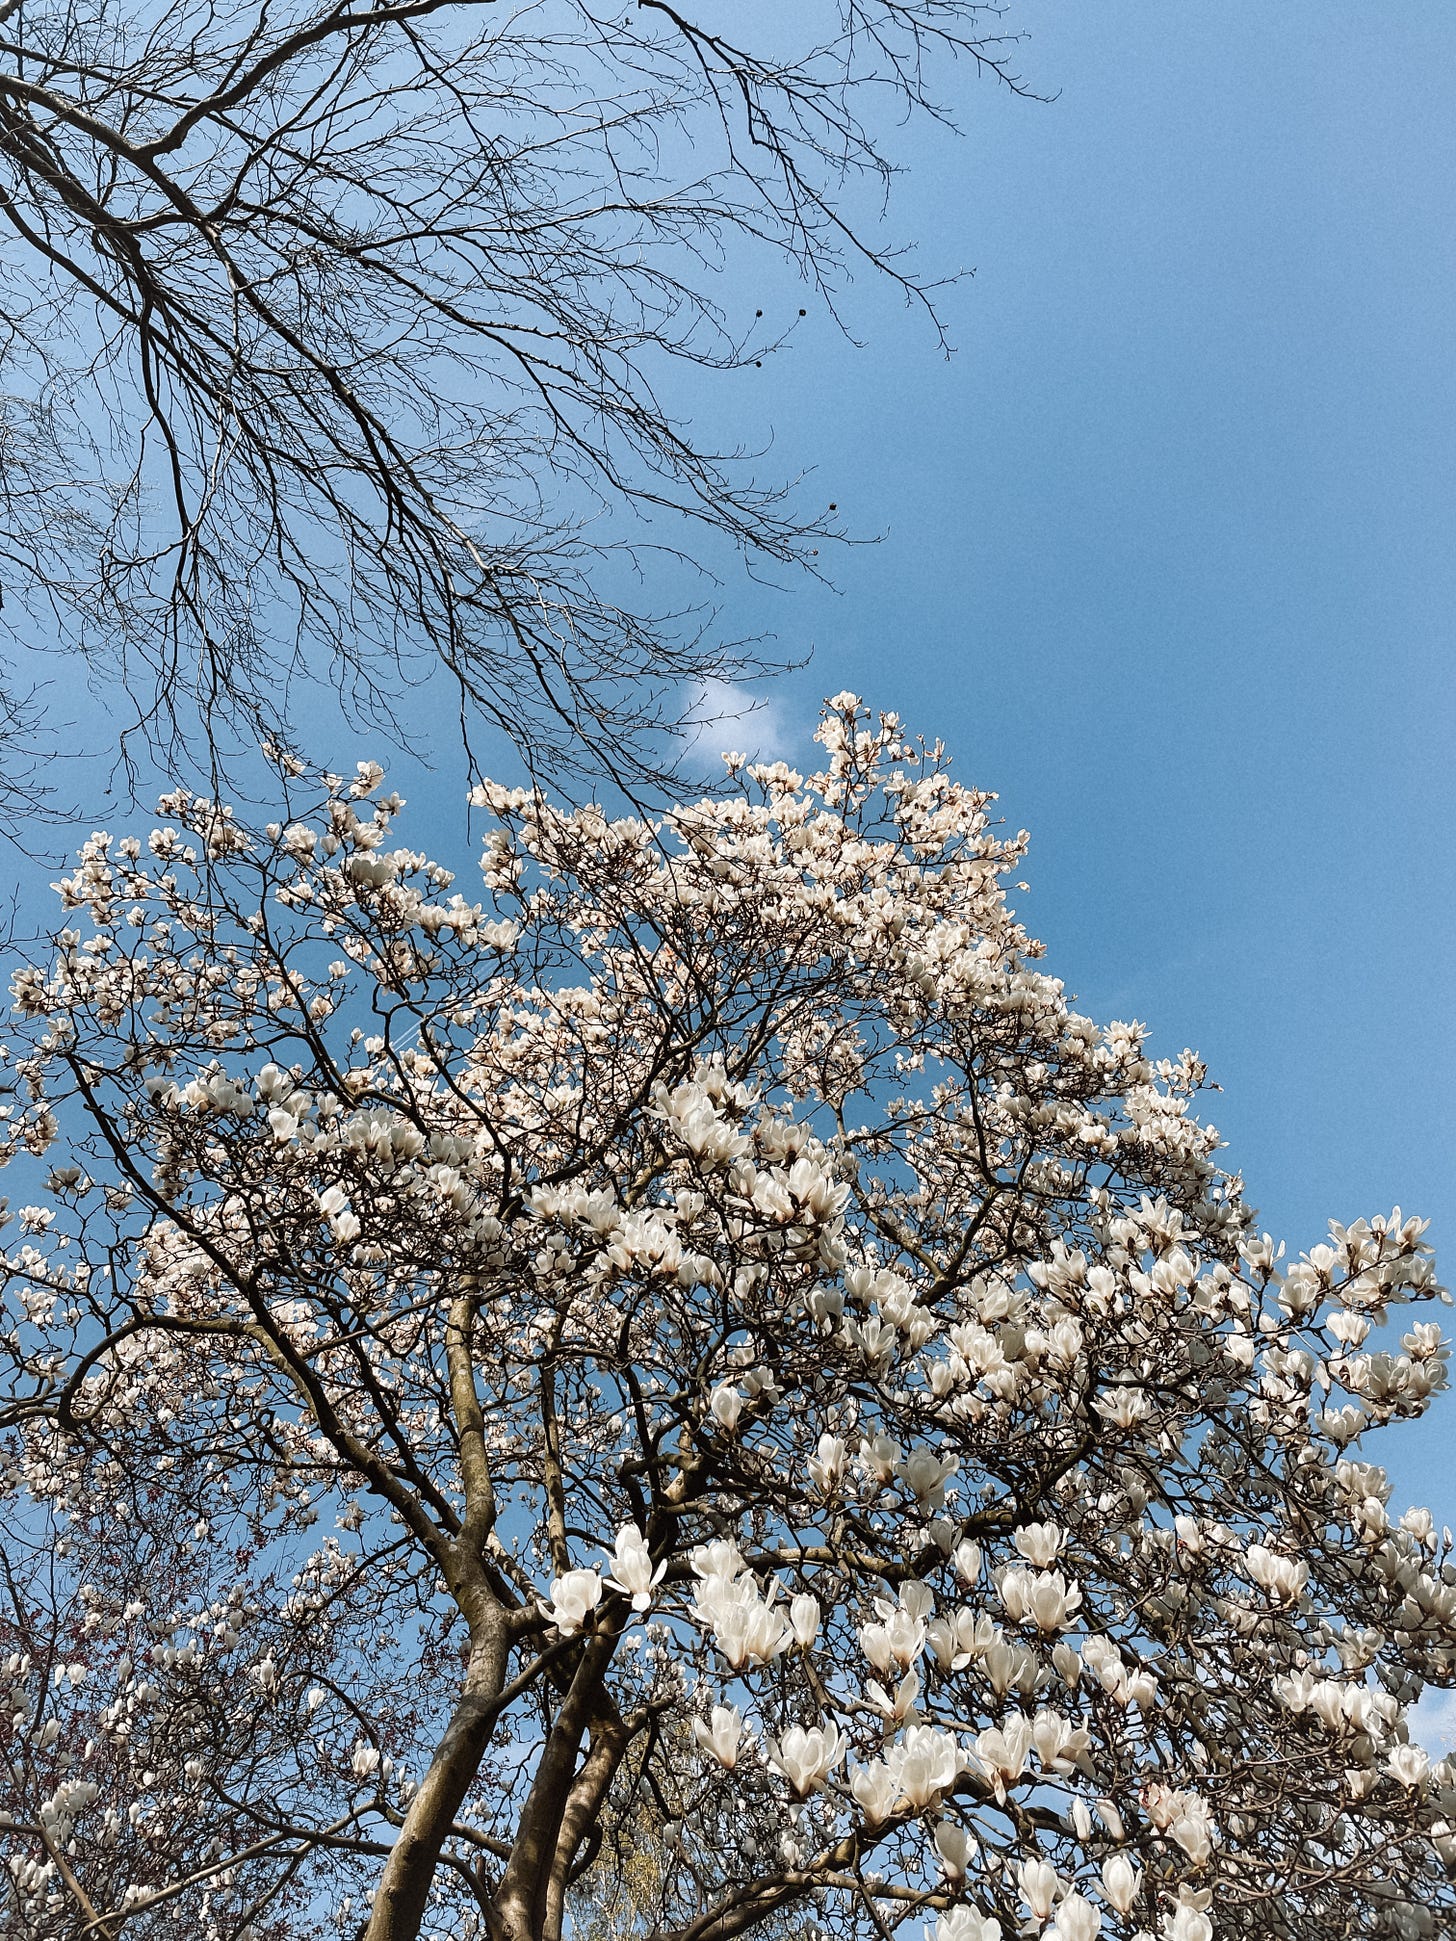 Looking up at blue skies on a sunny day. Bare branches of a tree, a Magnolia is in full bloom to the bottom of the frame.